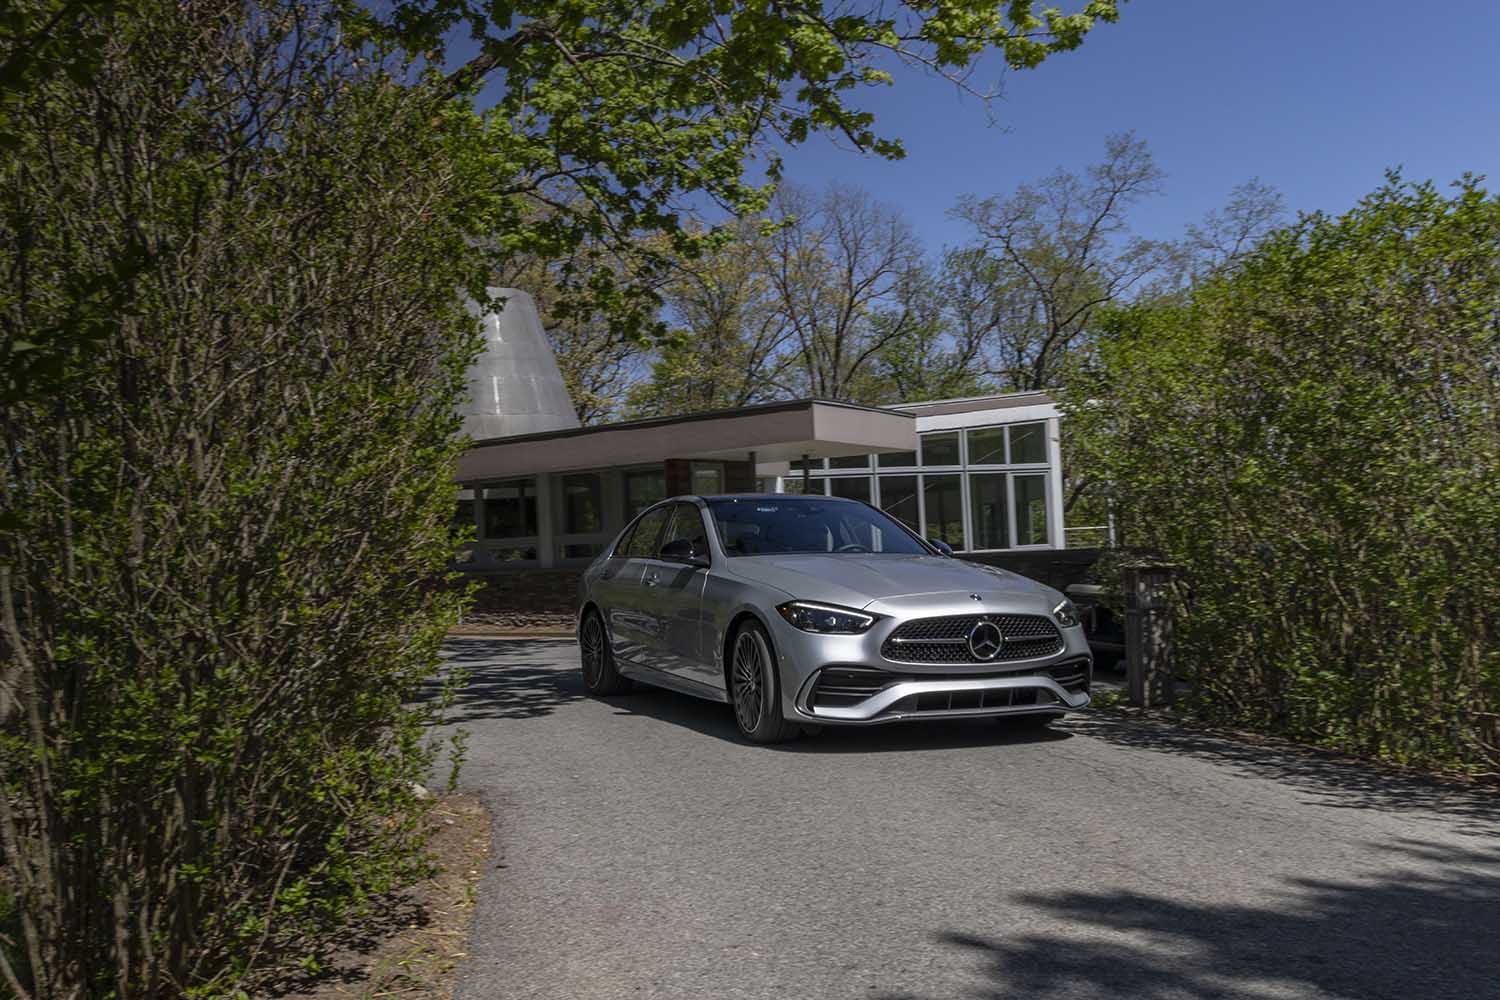 2022 Mercedes-Benz C-Class in silver parked in front of a building upon a pathway with bushes on both sides